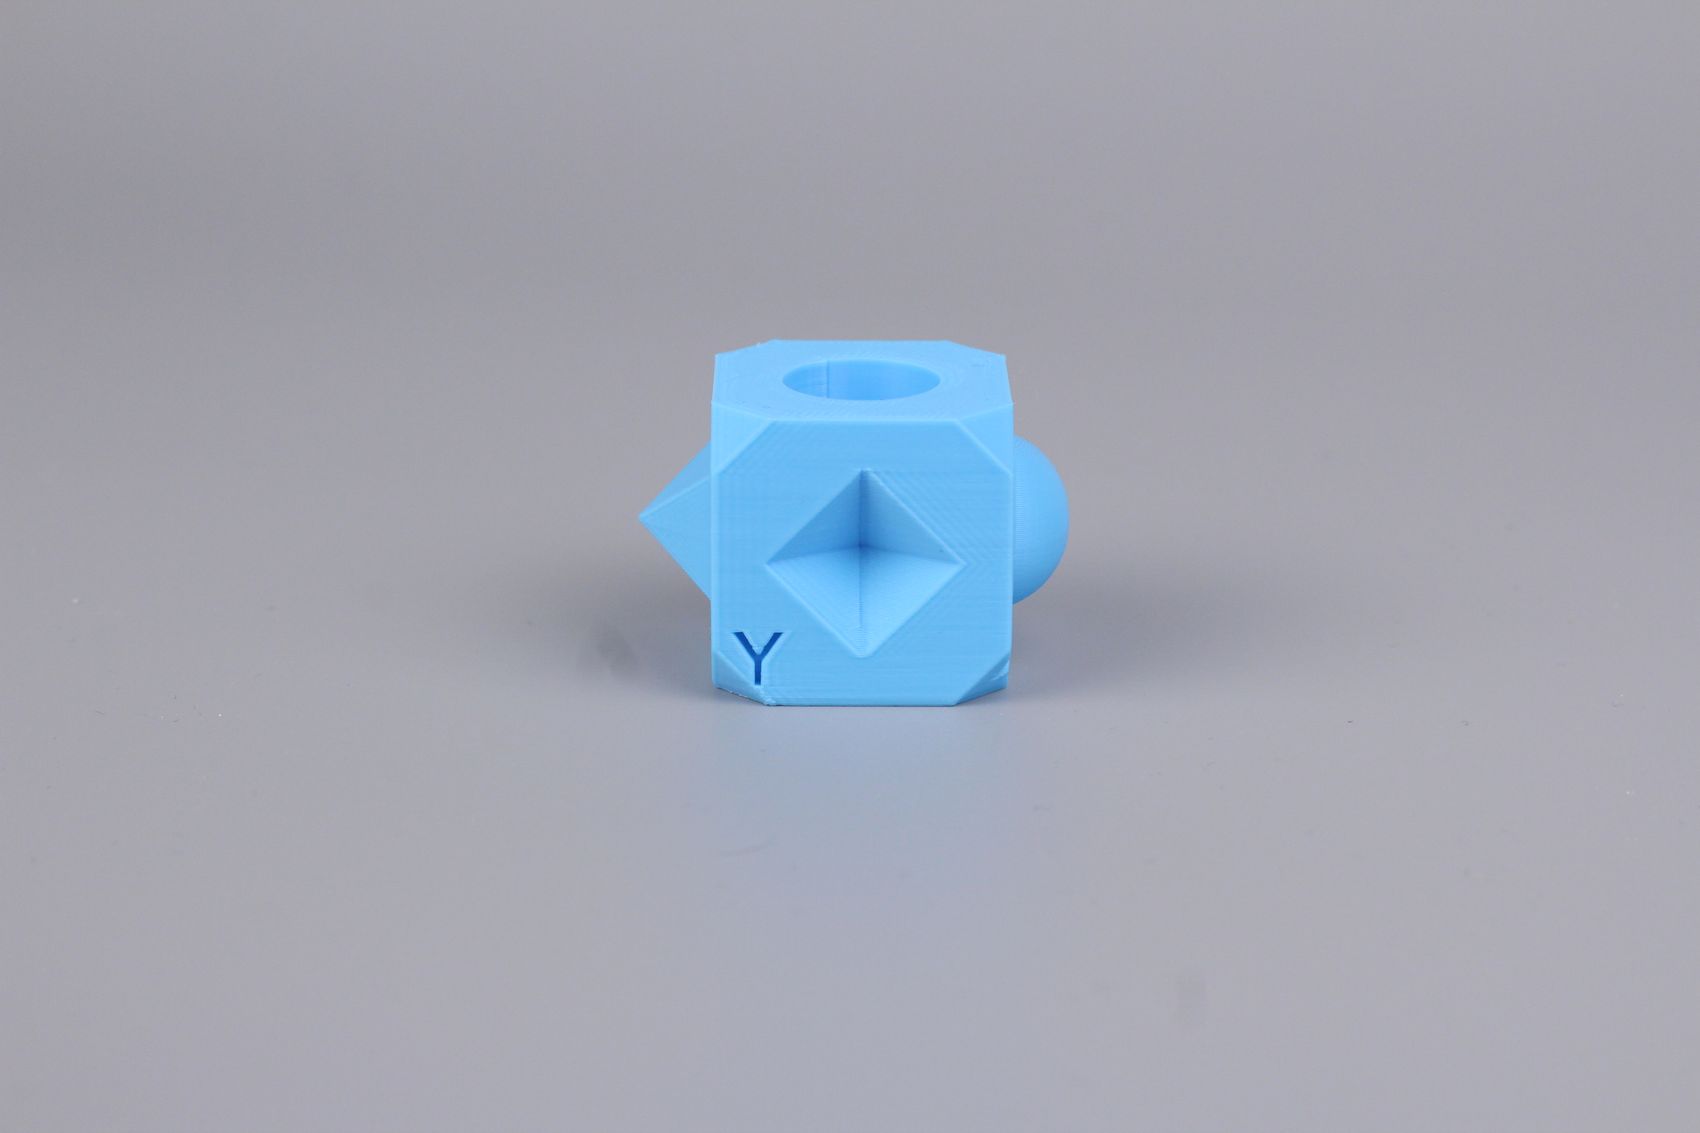 Zaribo Calibration Cube Ender 5 S1 Review1 | Creality Ender-5 S1 Review: Is it a worthy upgrade?